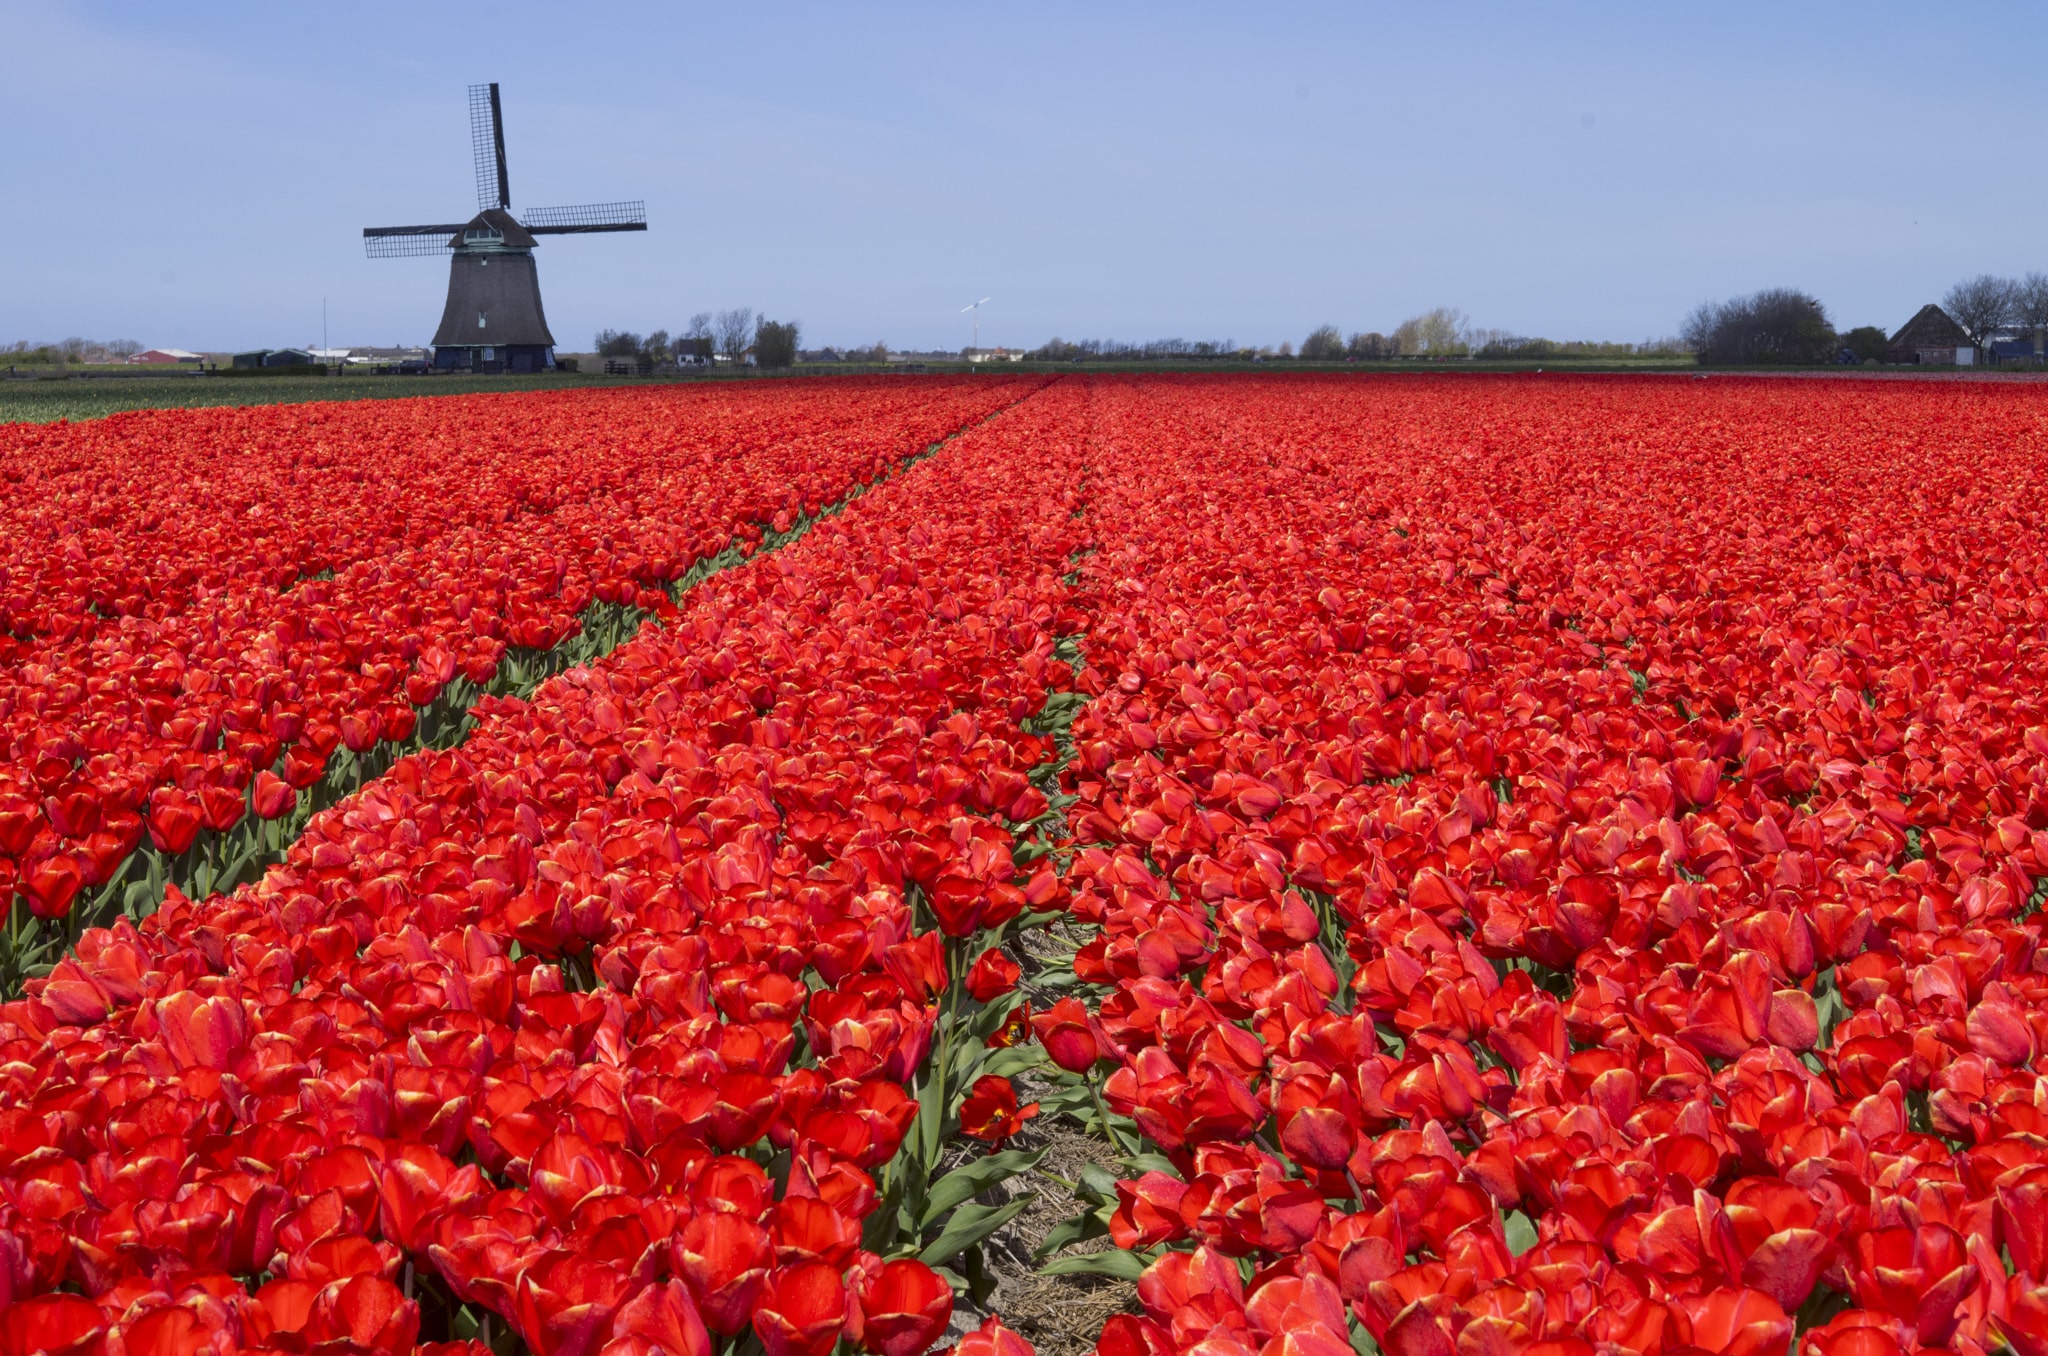 Why Do They Grow Tulips in Holland?